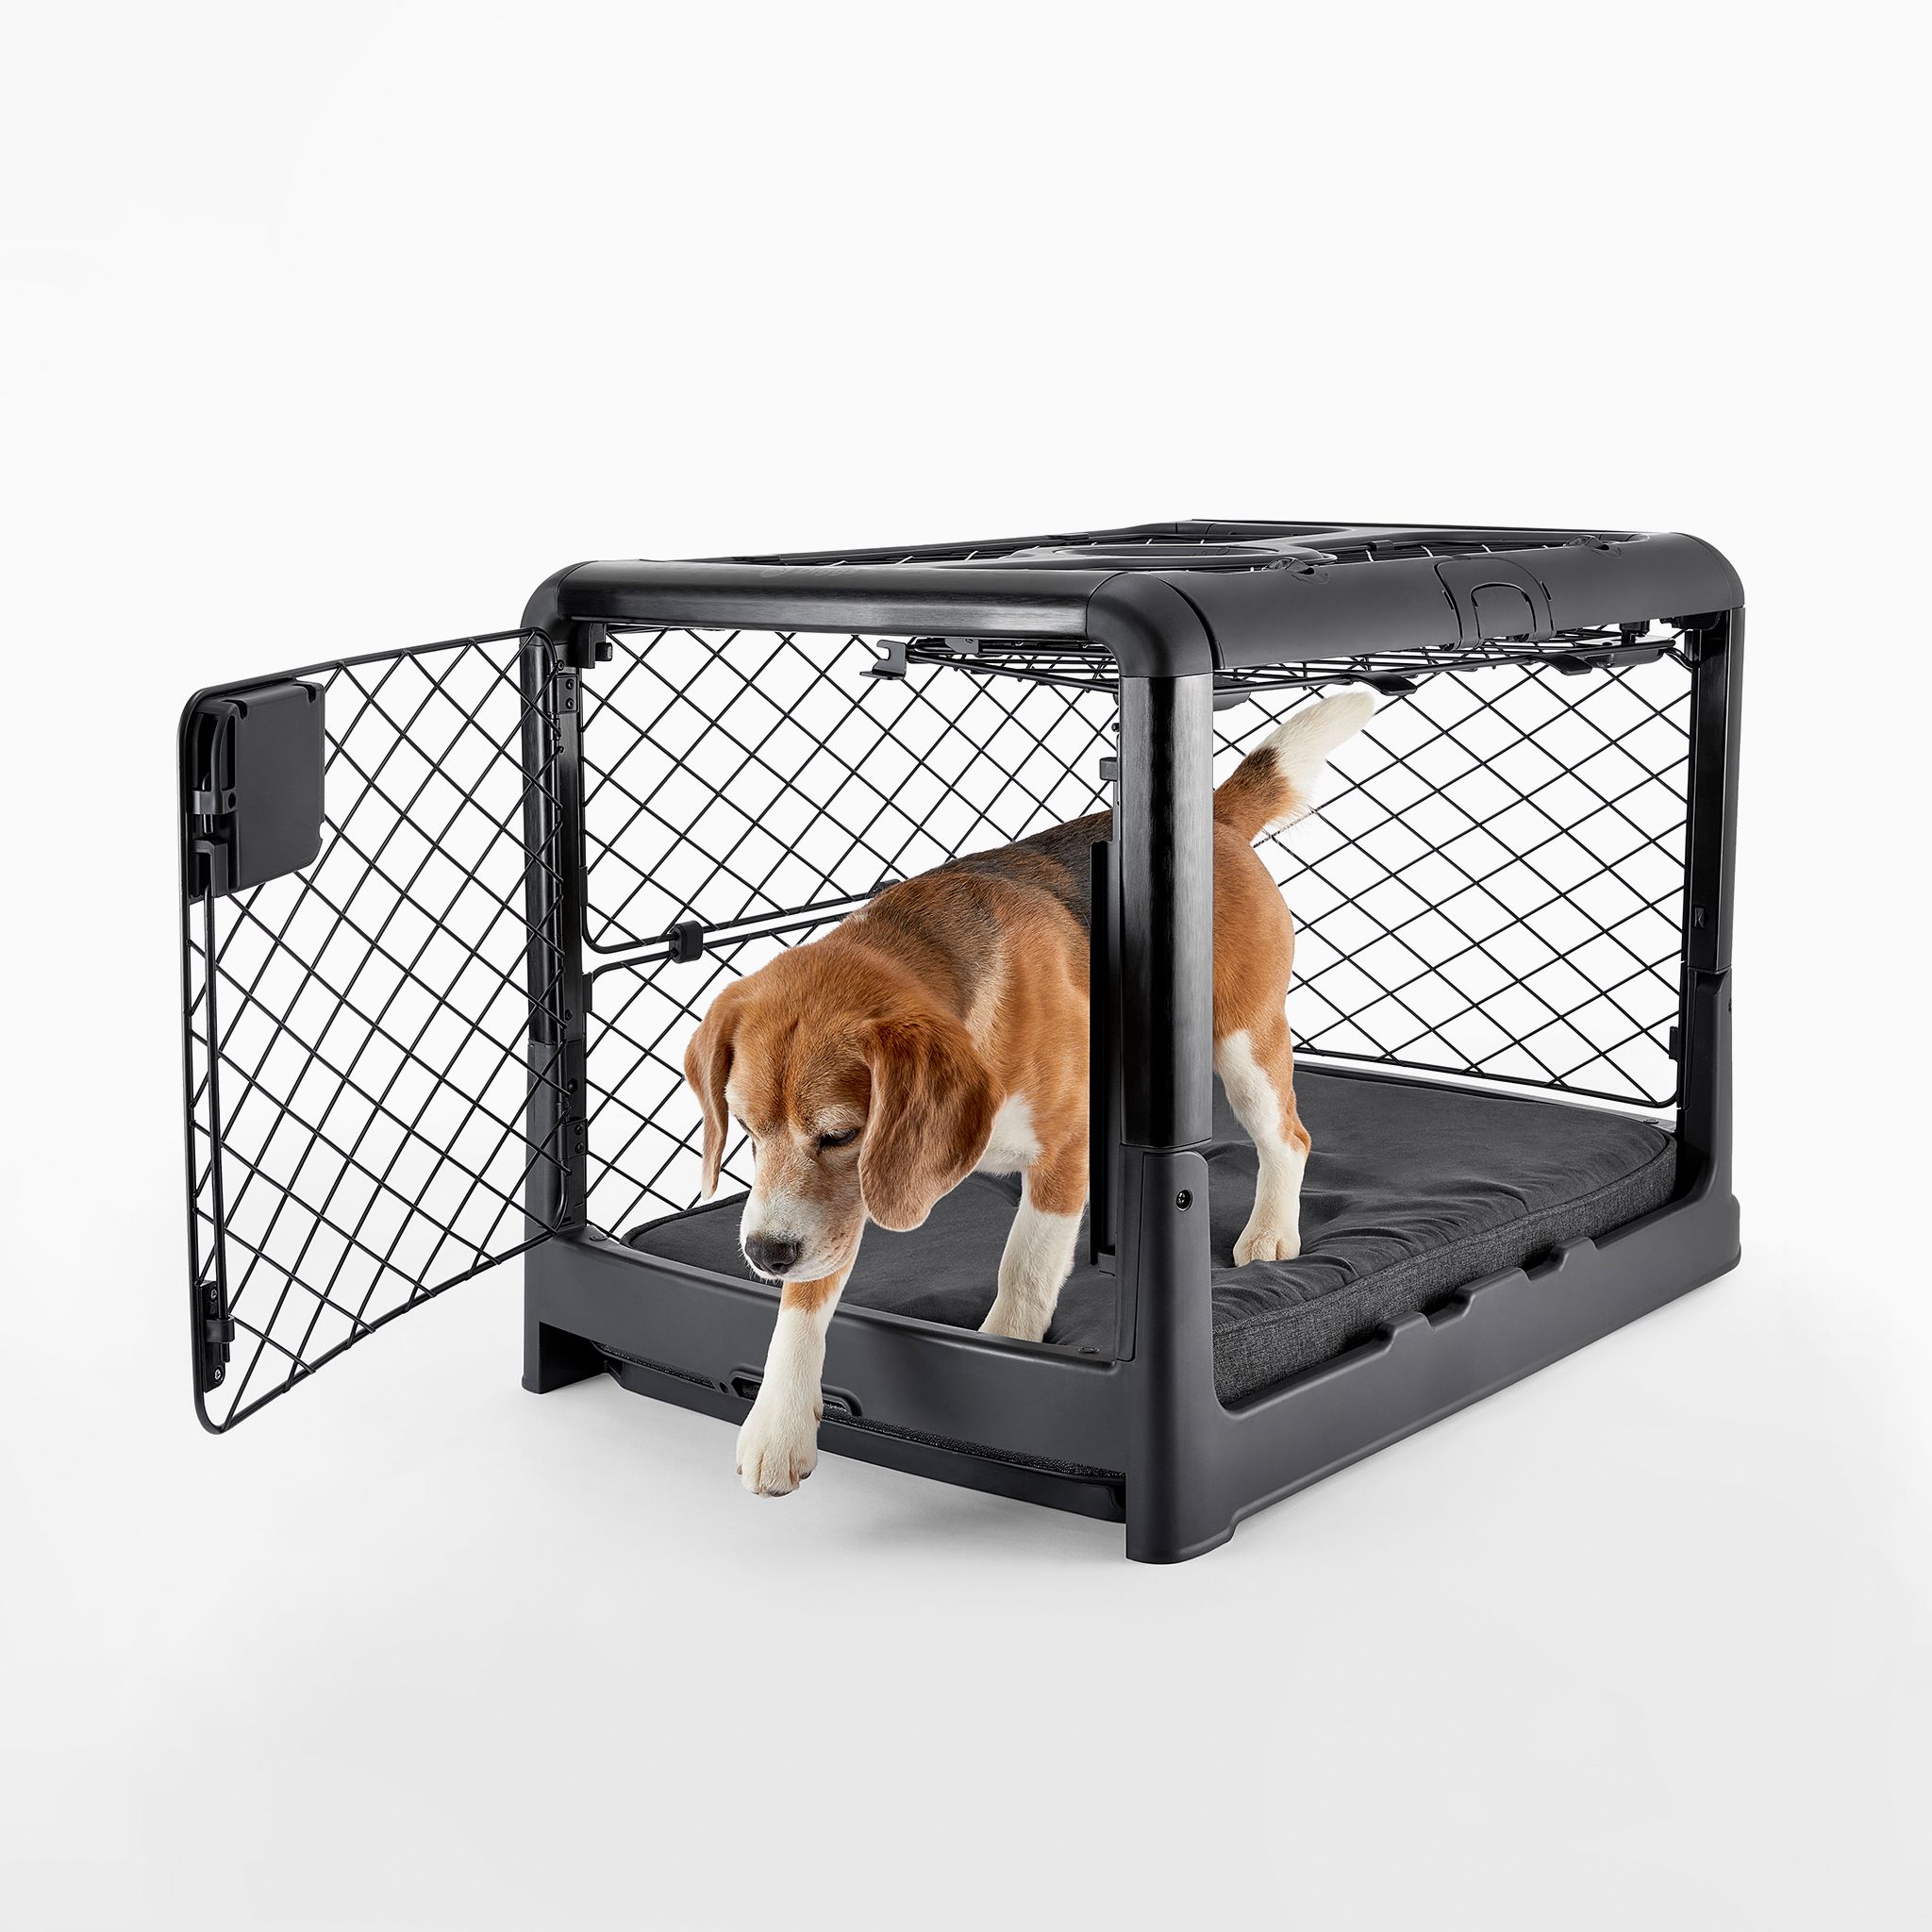 Groov Dog Training Toy Treat Dispenser, Crate Training Aids for